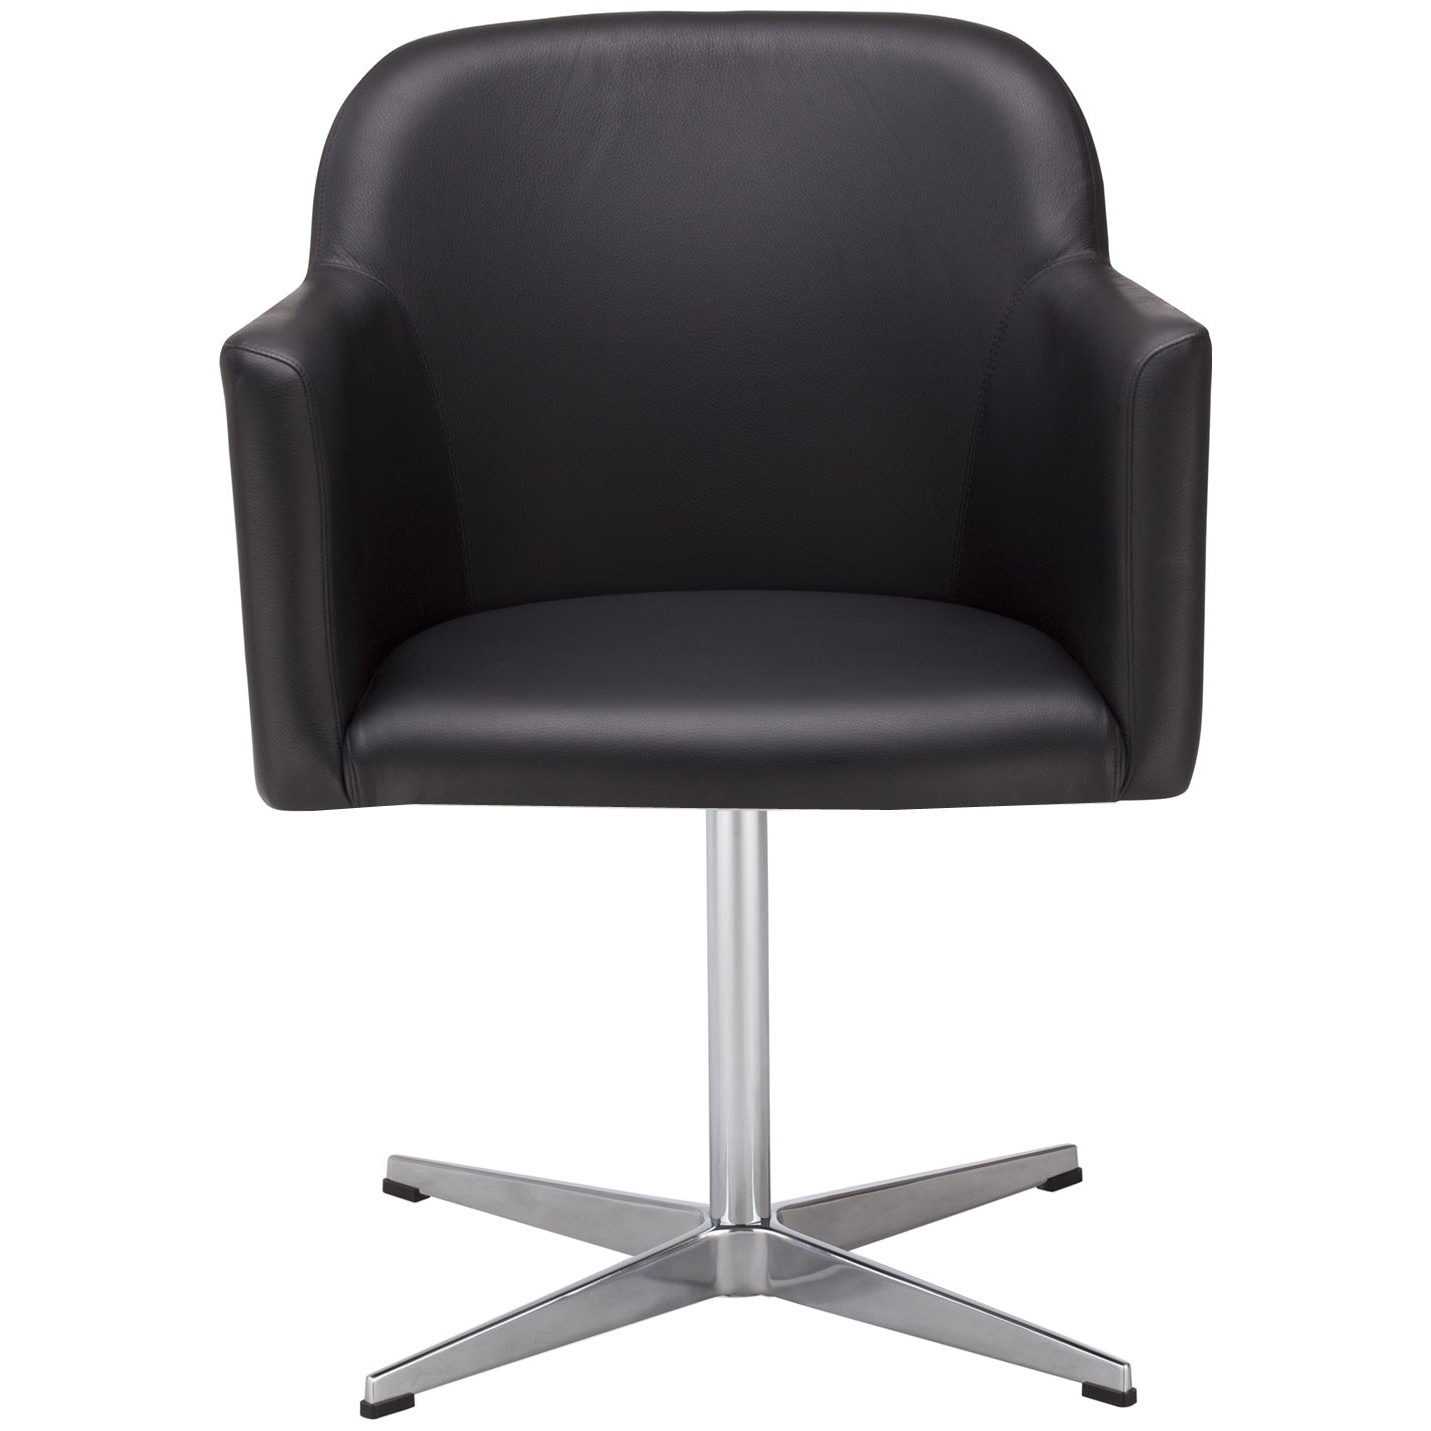 Athena Leather Faced Reception Chair | Free UK Delivery